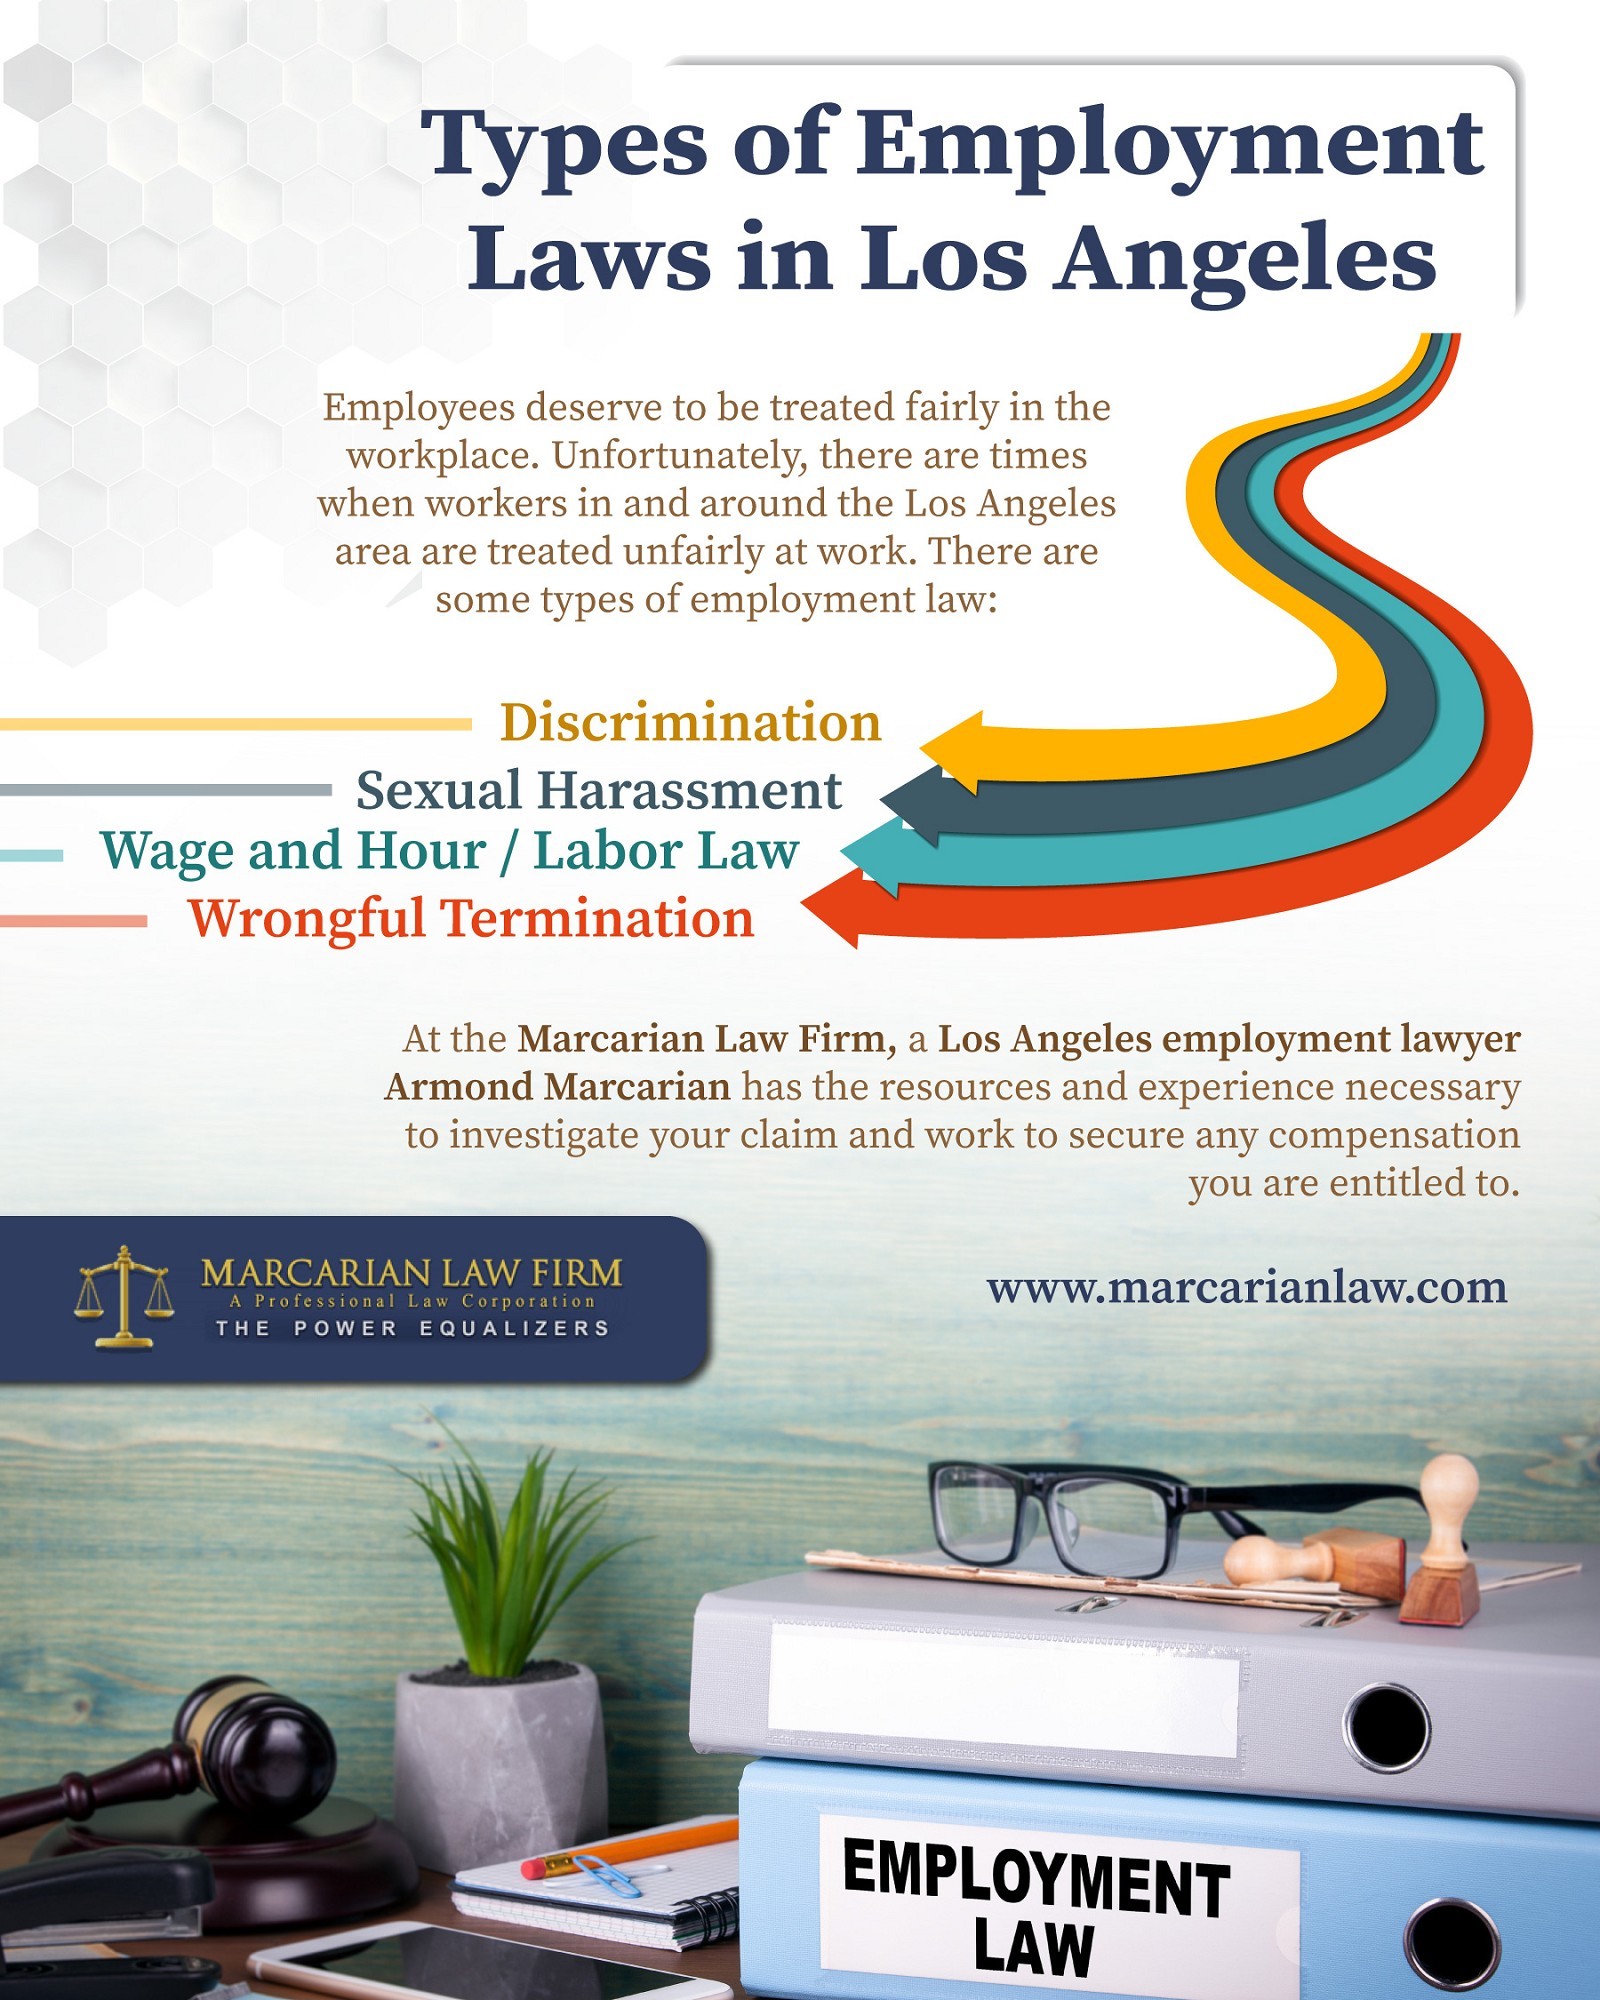 Types of Employment Laws in Los Angeles